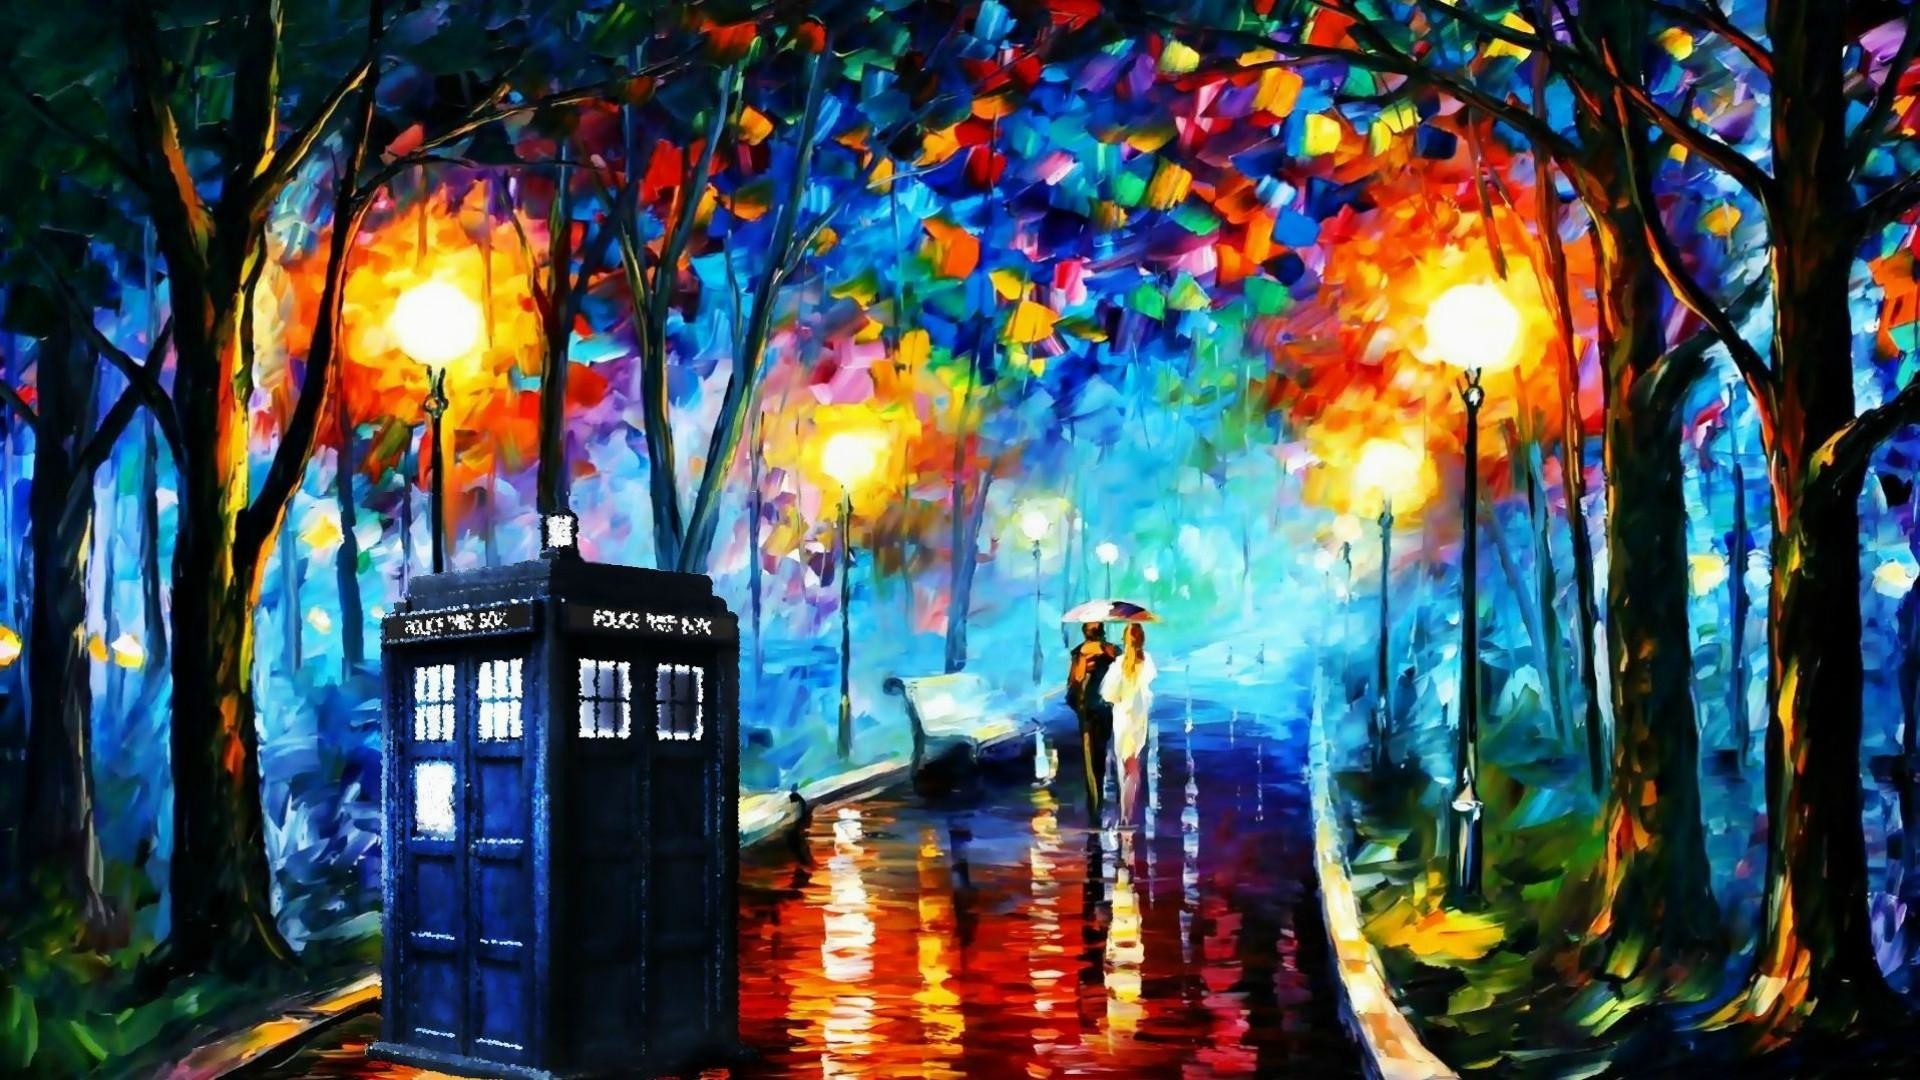 Doctor-who-tardis-wallpaper-pictures